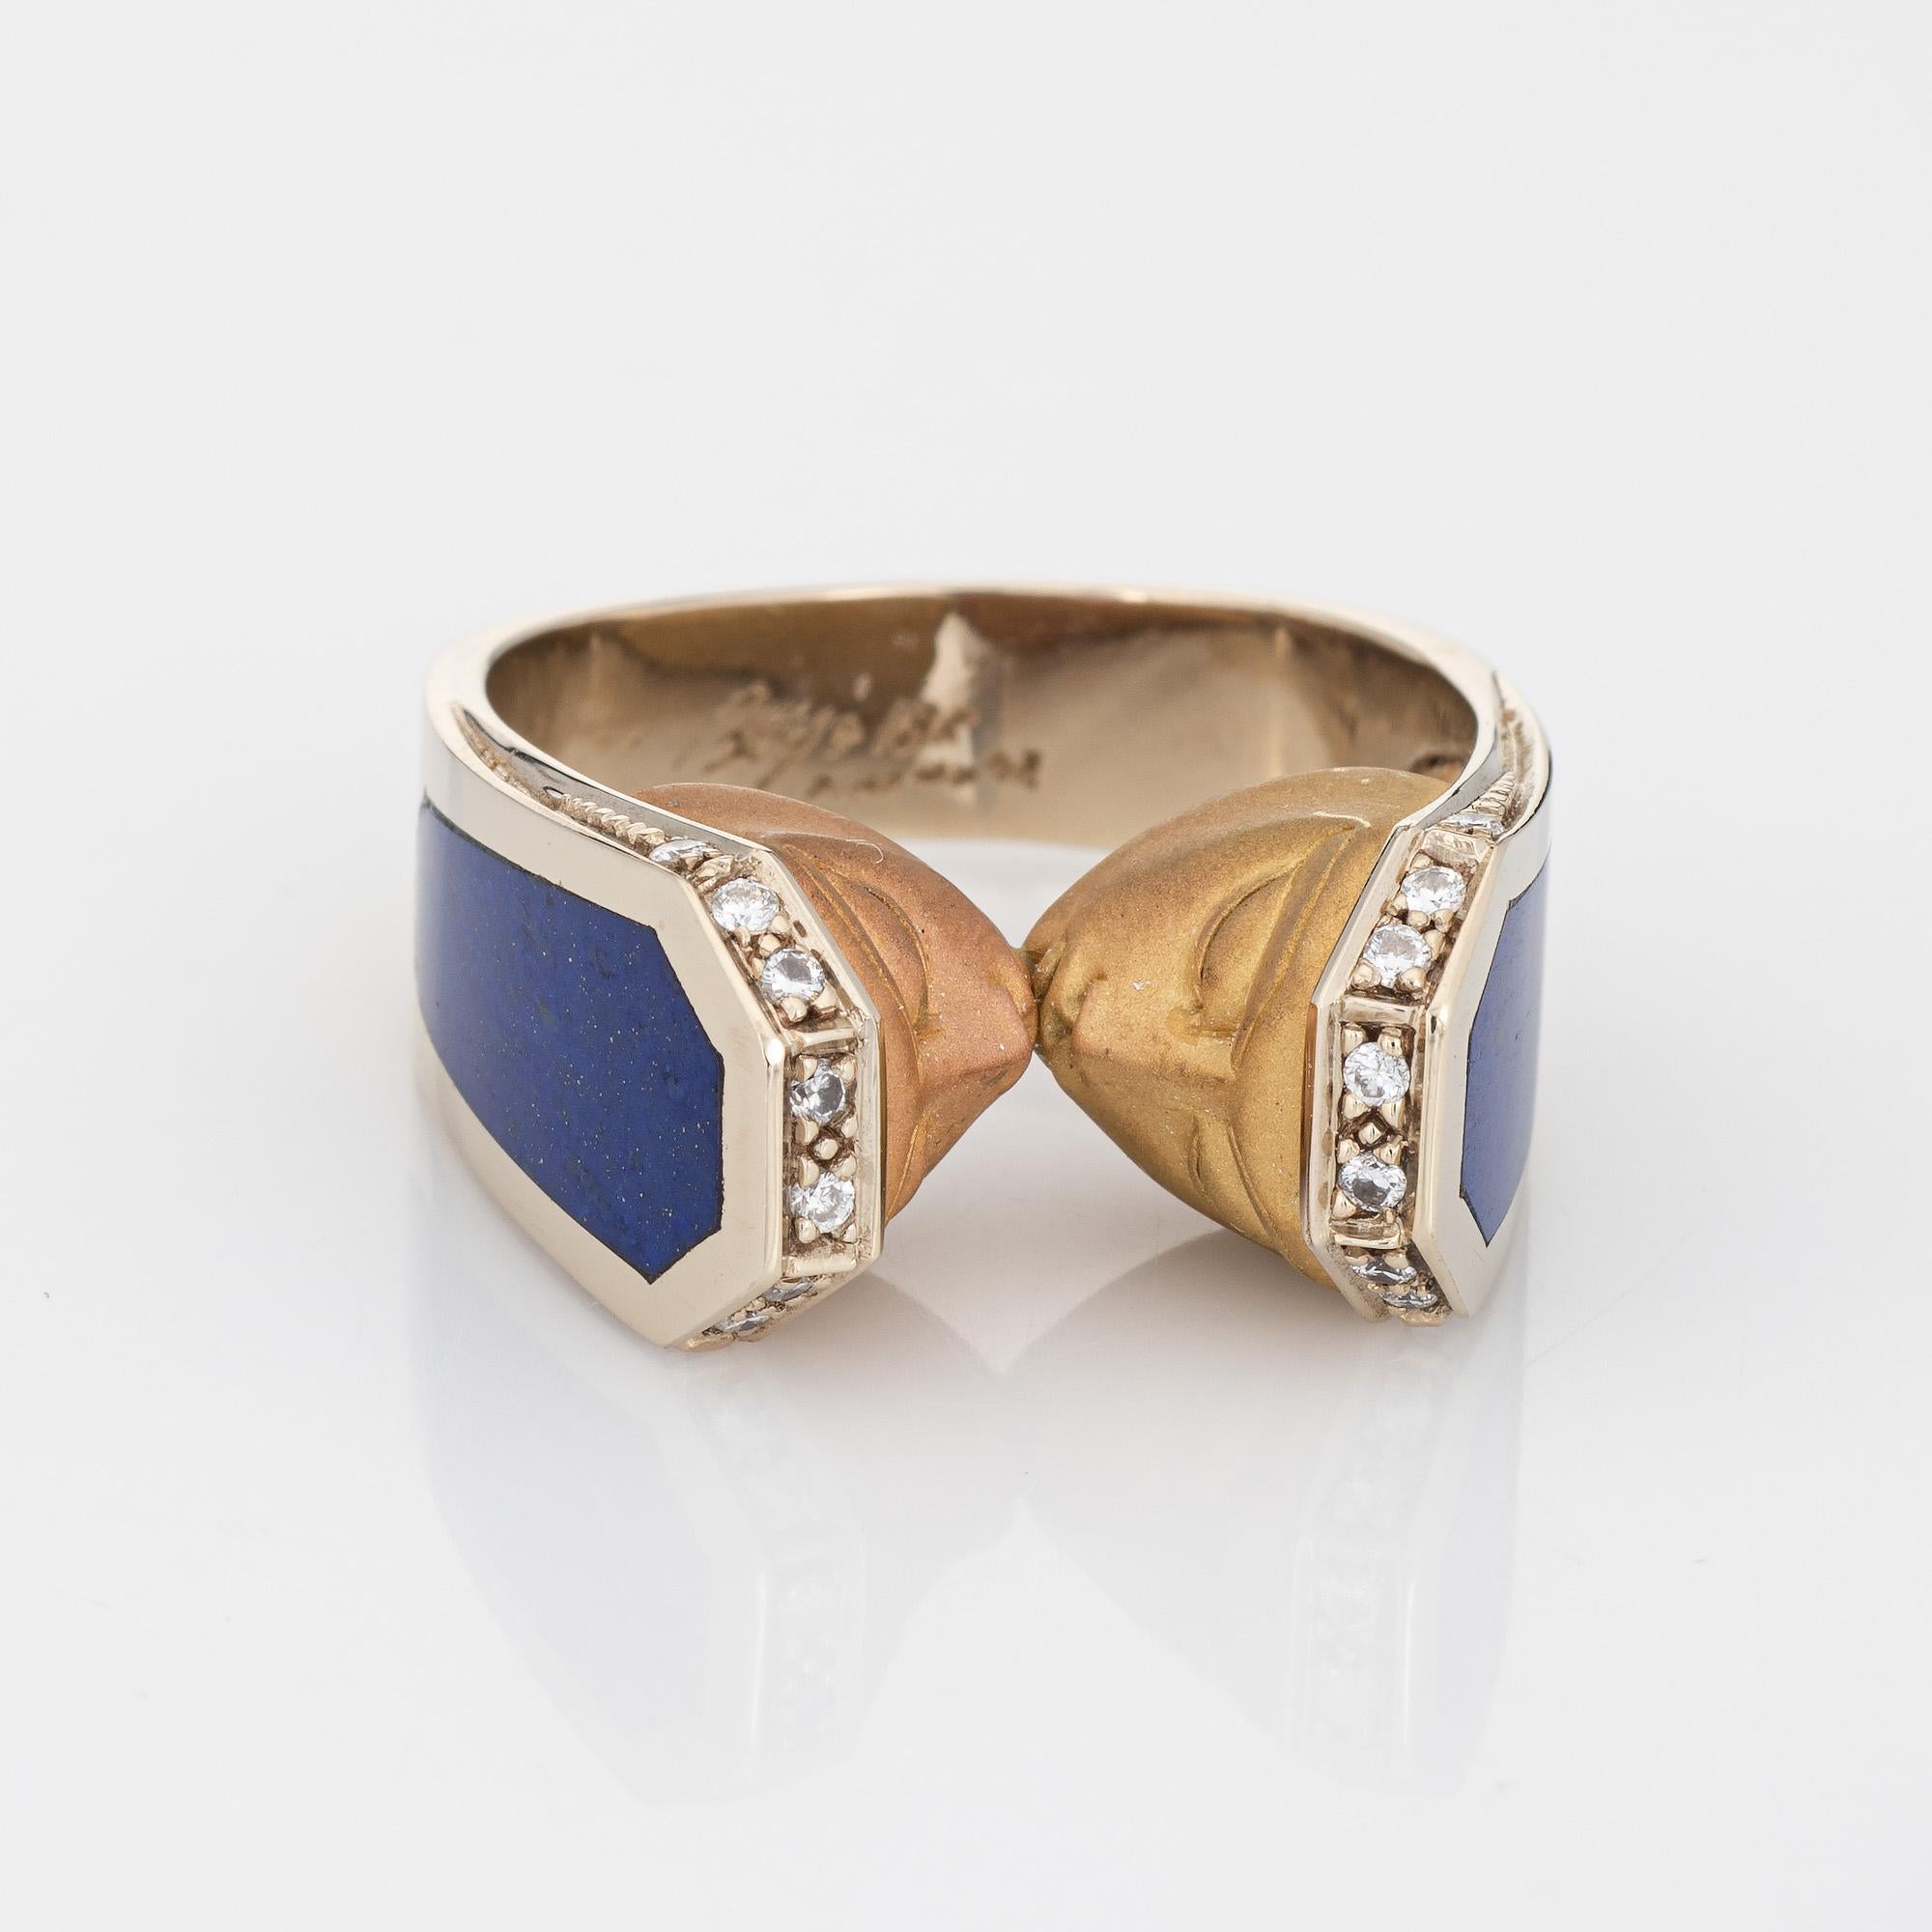 Stylish pre-owned ring by Berjo crafted in 18 karat yellow & rose gold. 

Sixteen diamonds total an estimated 0.08 carats (estimated at H-J color and SI1-I1 clarity). Lapis lazuli is inlaid into the side shoulders measuring 18mm x 6mm. The lapis is